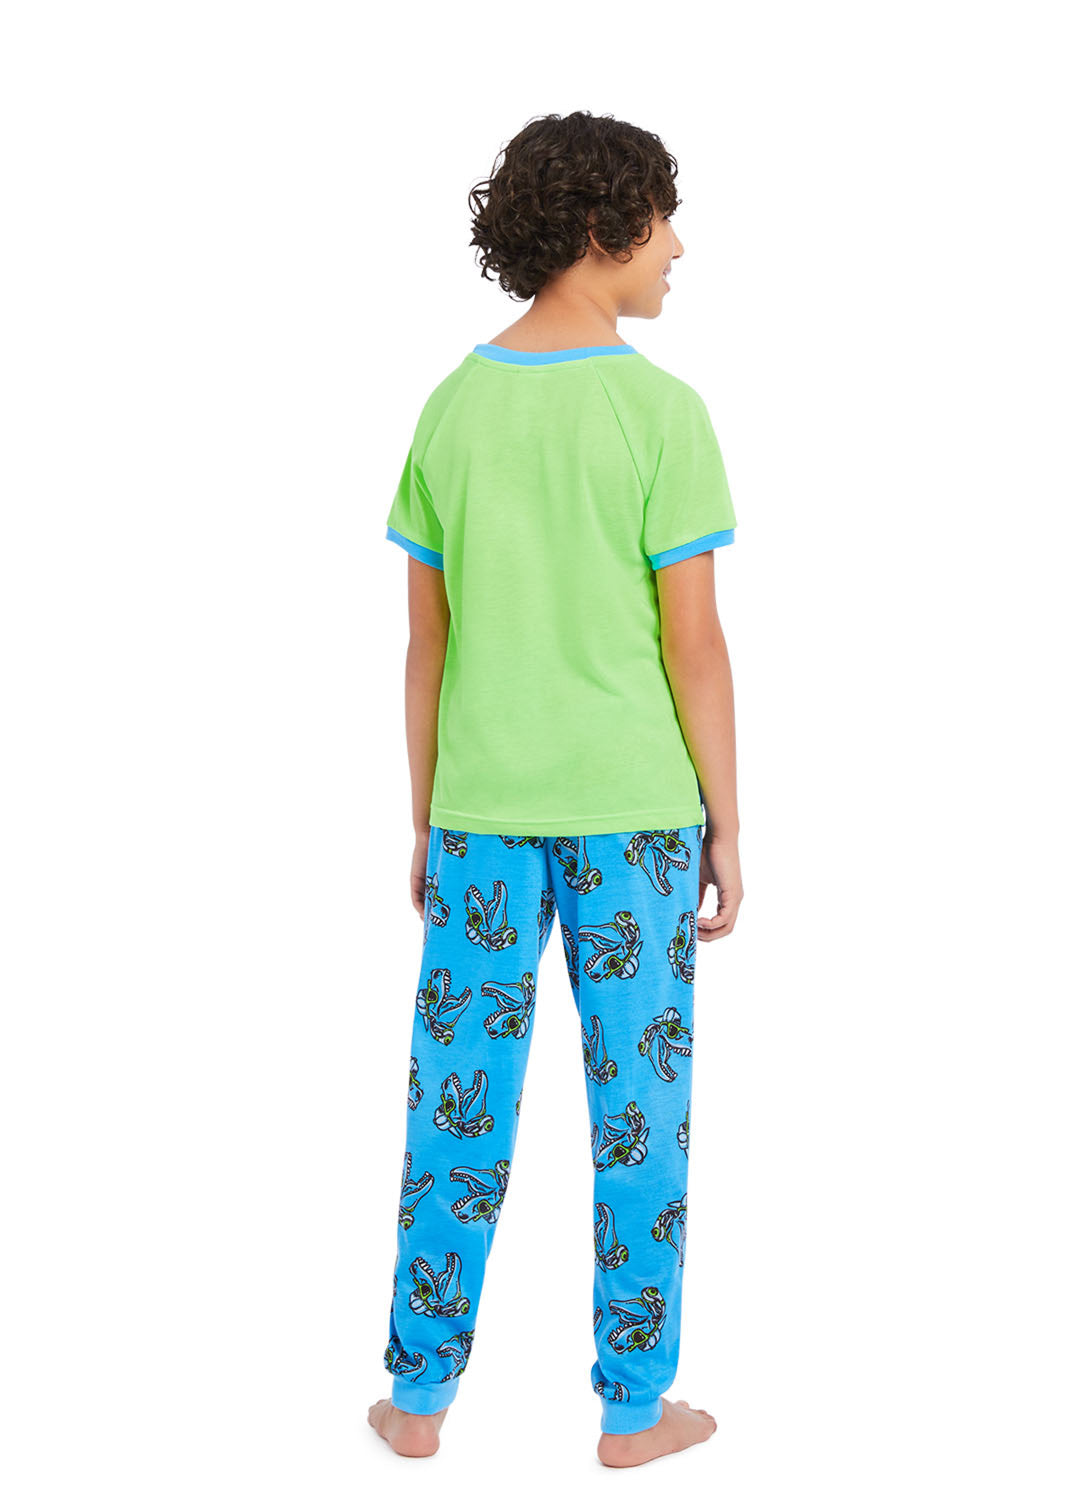 Back view Boy wearing Pajama Set Dino, t-shirt (multi colour) with print and pants (blue) with print